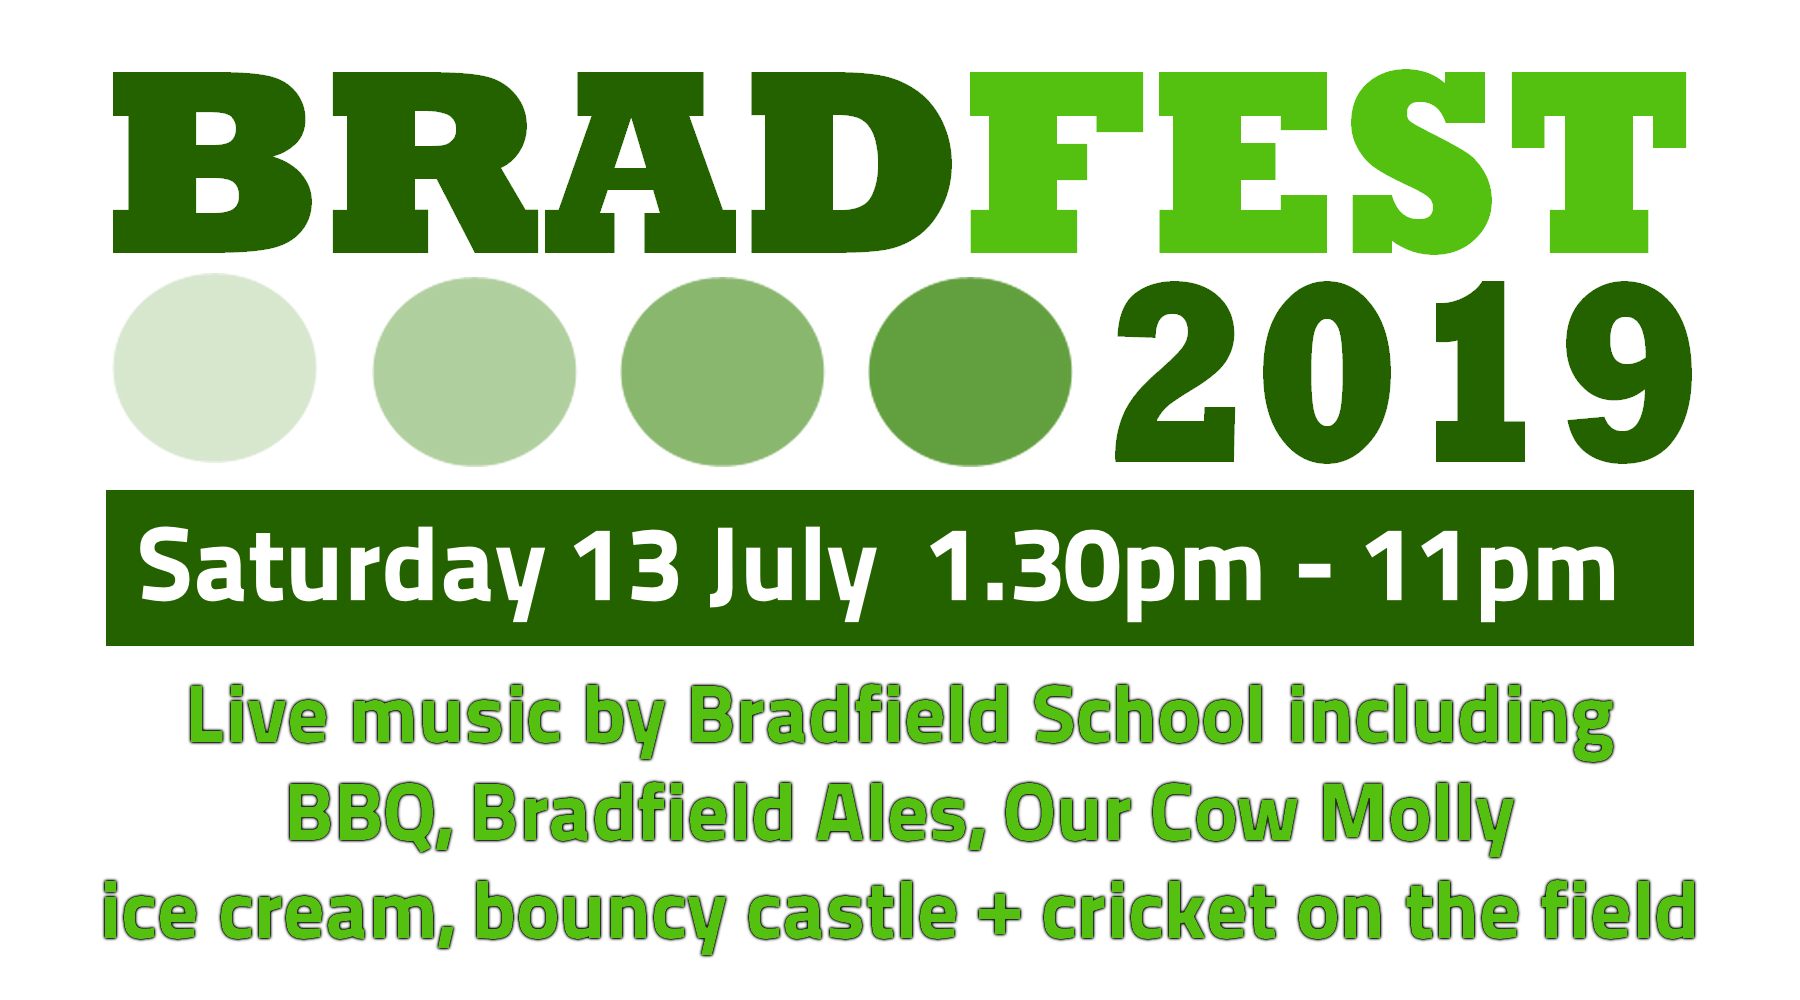 BRADFEST 2019 - Saturday 13th July 2019 - Festival of local music, food and ale in Low Bradfield, Sheffield.